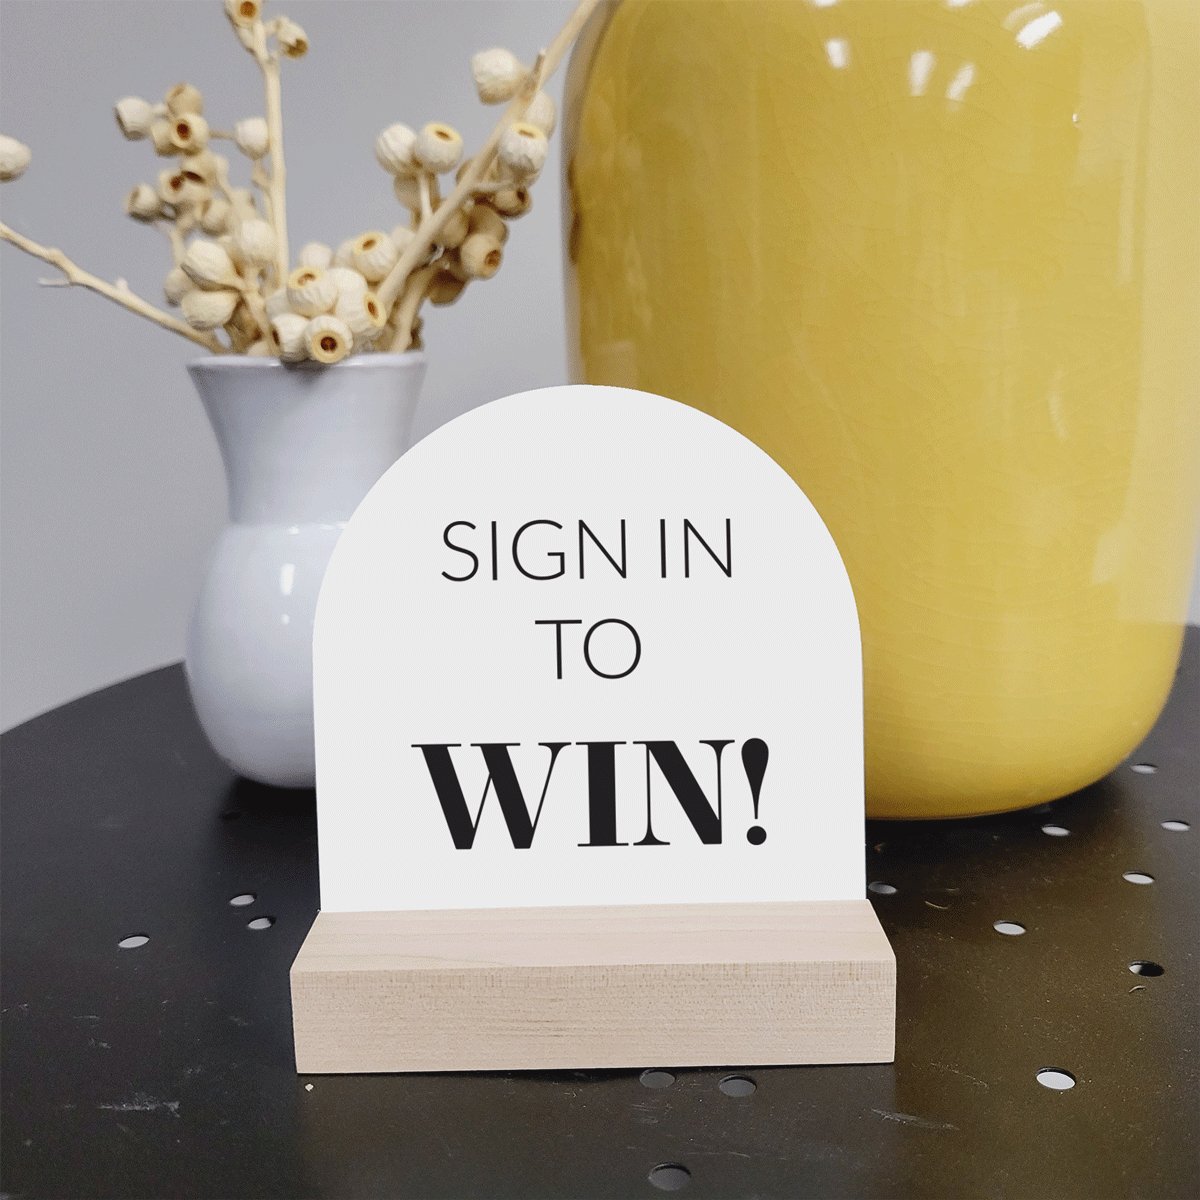 4x4 Arched Sign - Sign In to WIN! - All Things Real Estate